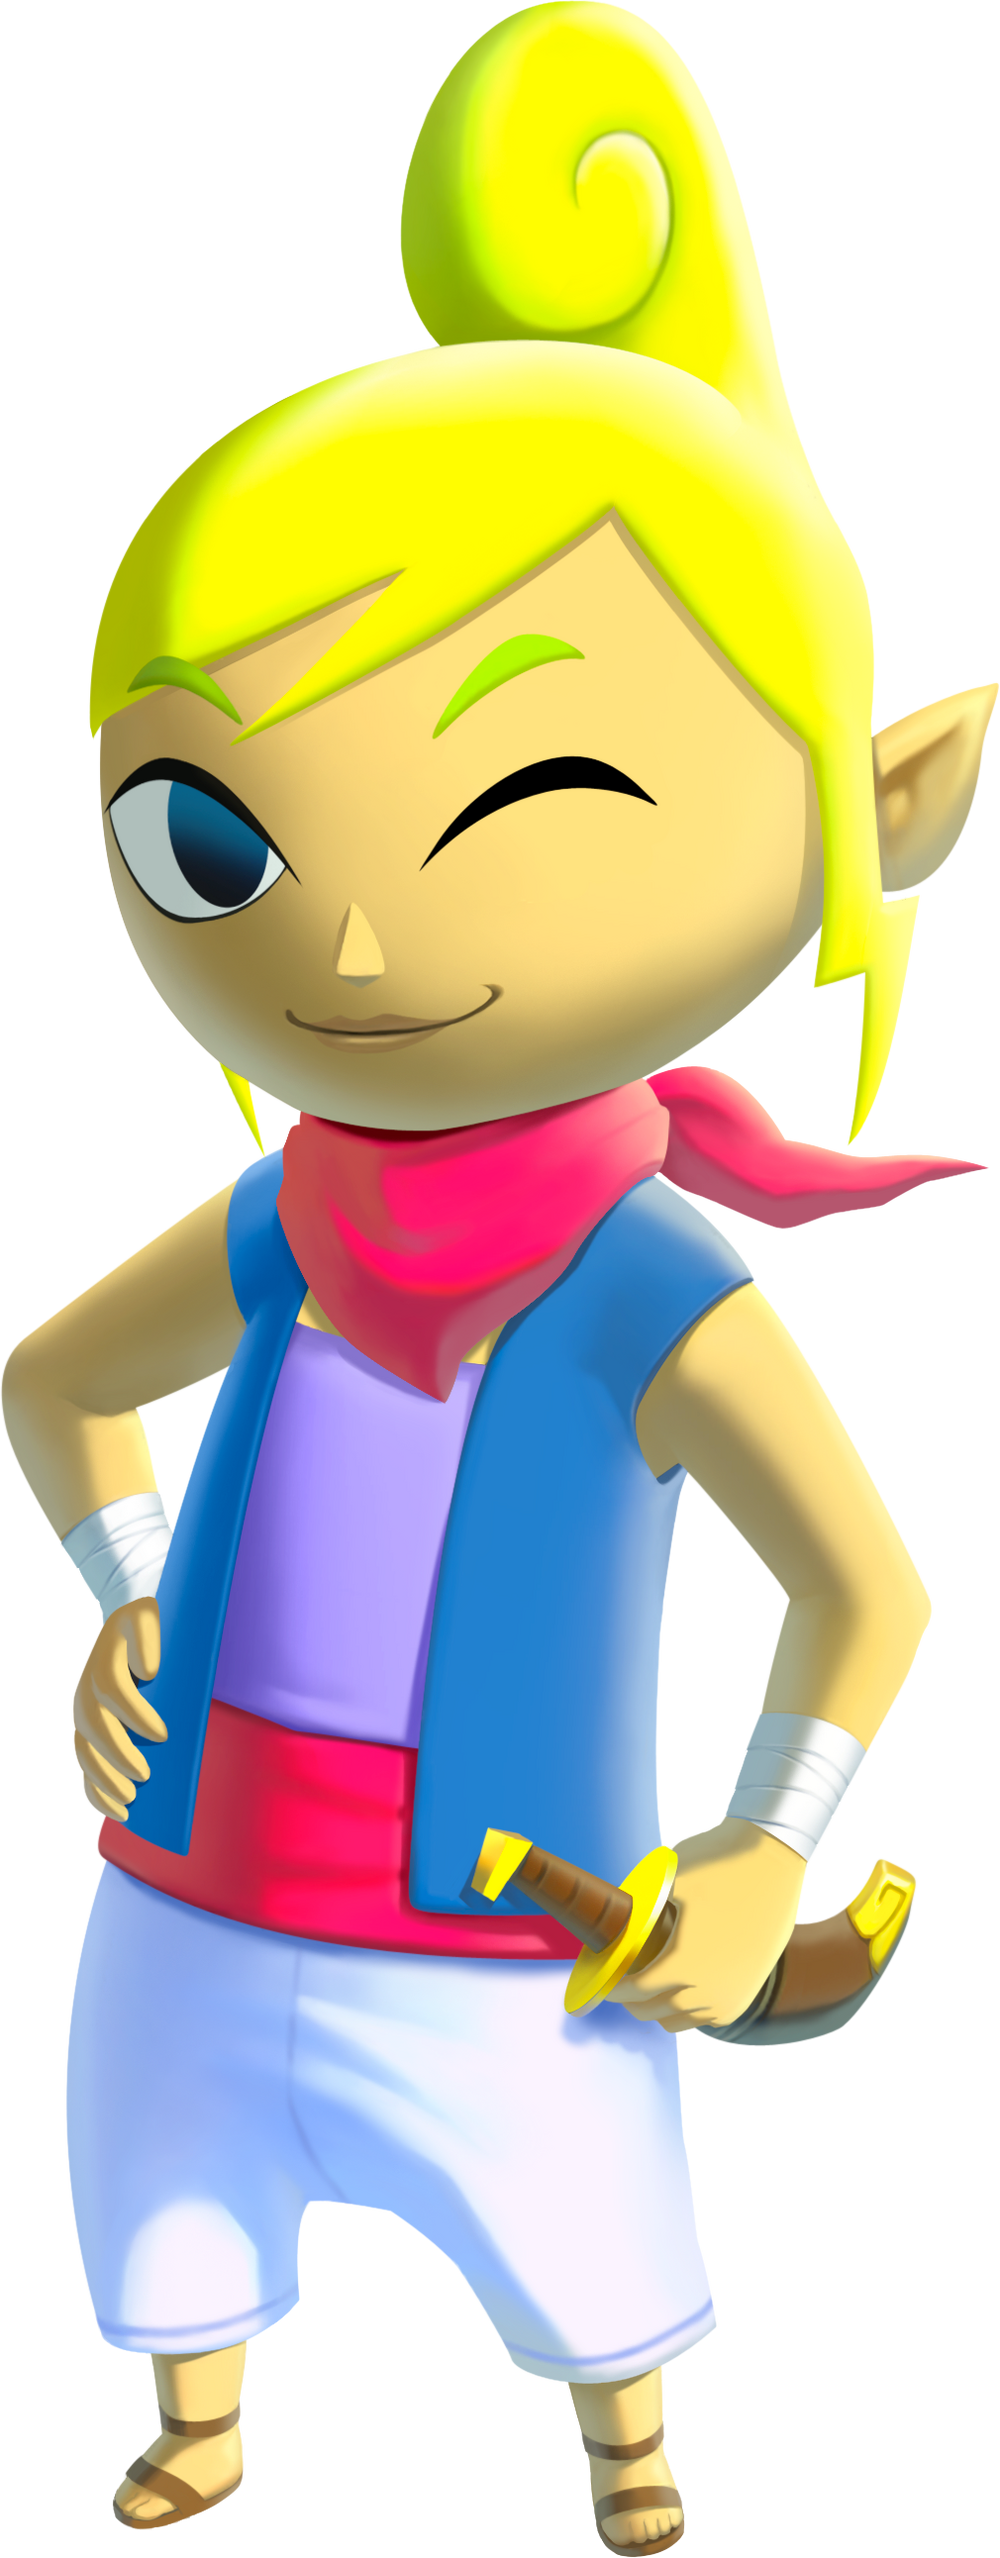 TWWHD Tetra.png